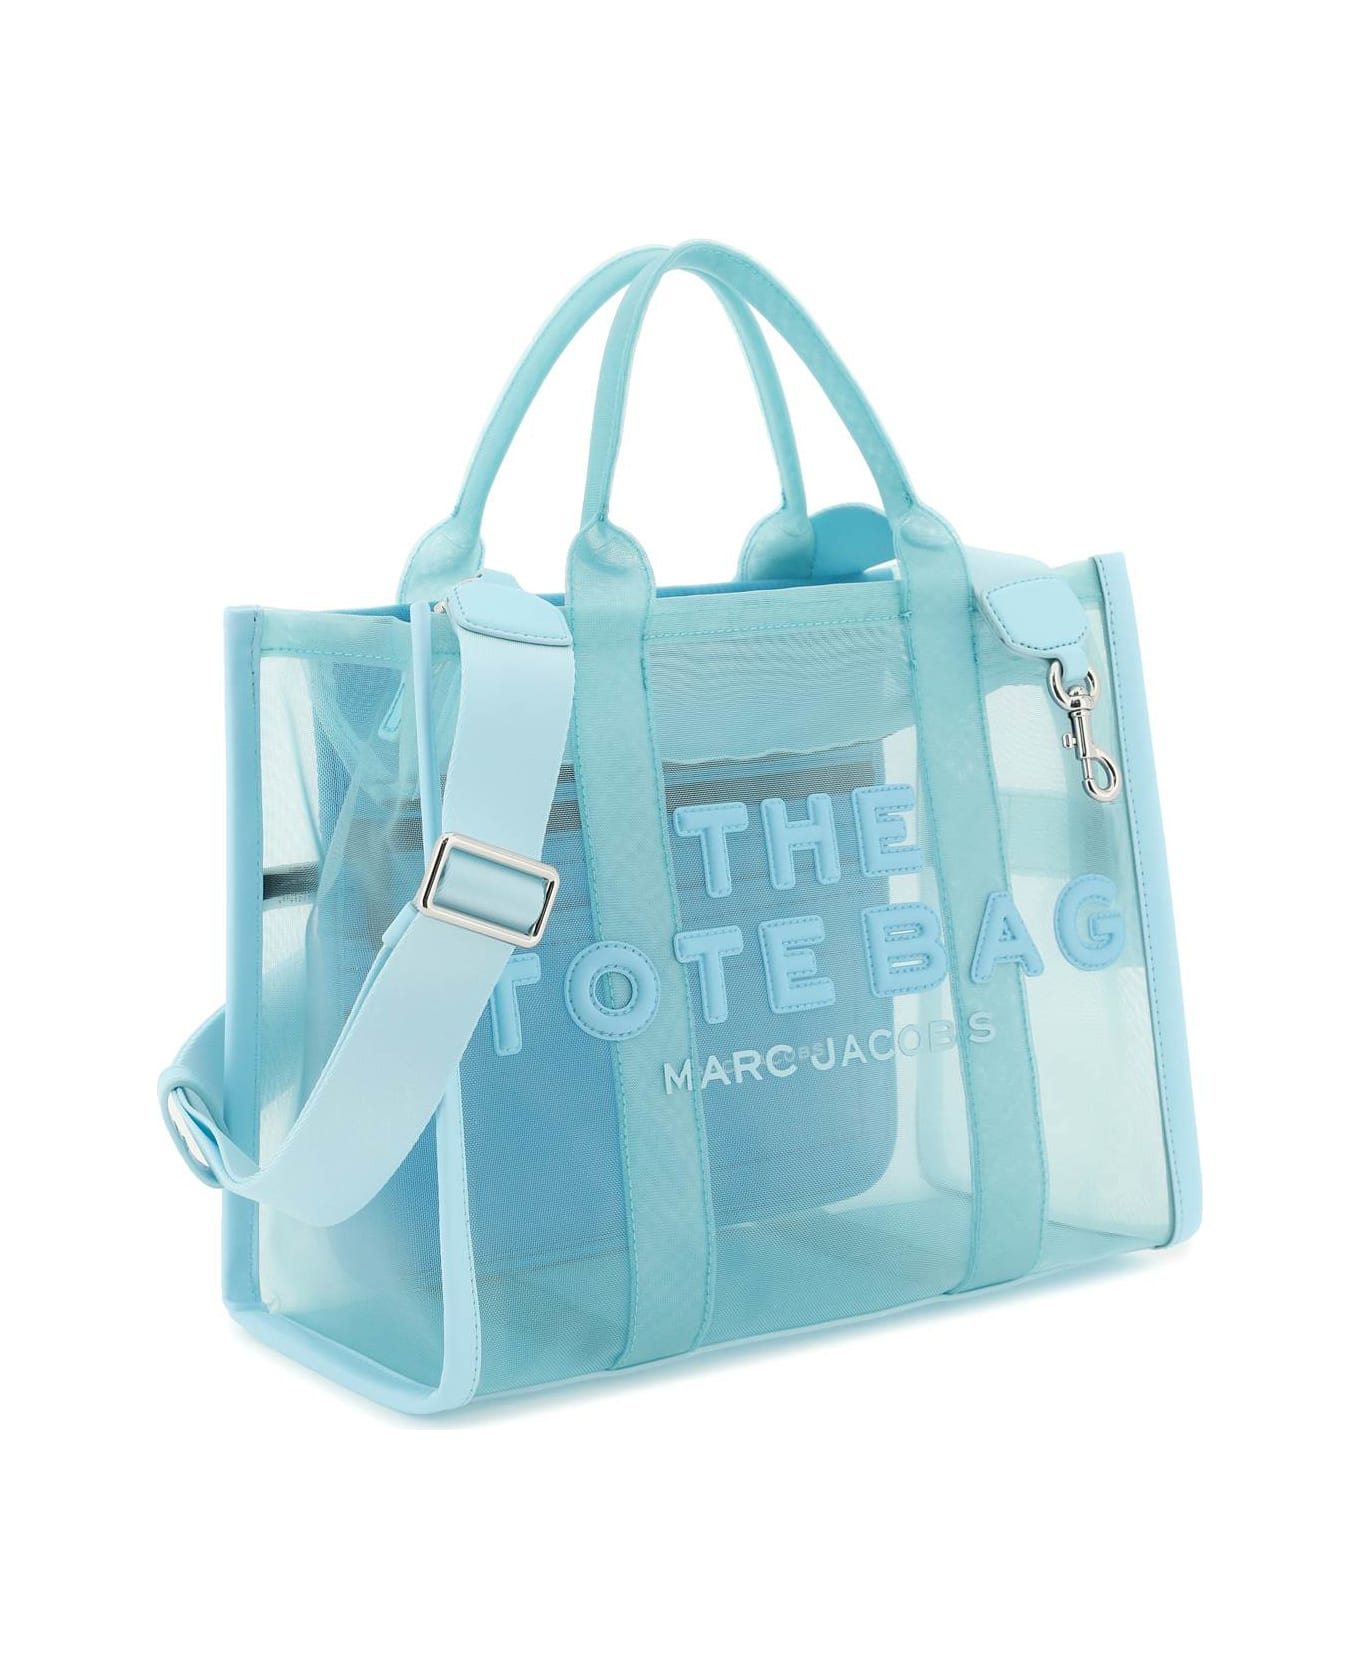 Marc Jacobs The Mesh Small Tote Bag - Pale blue